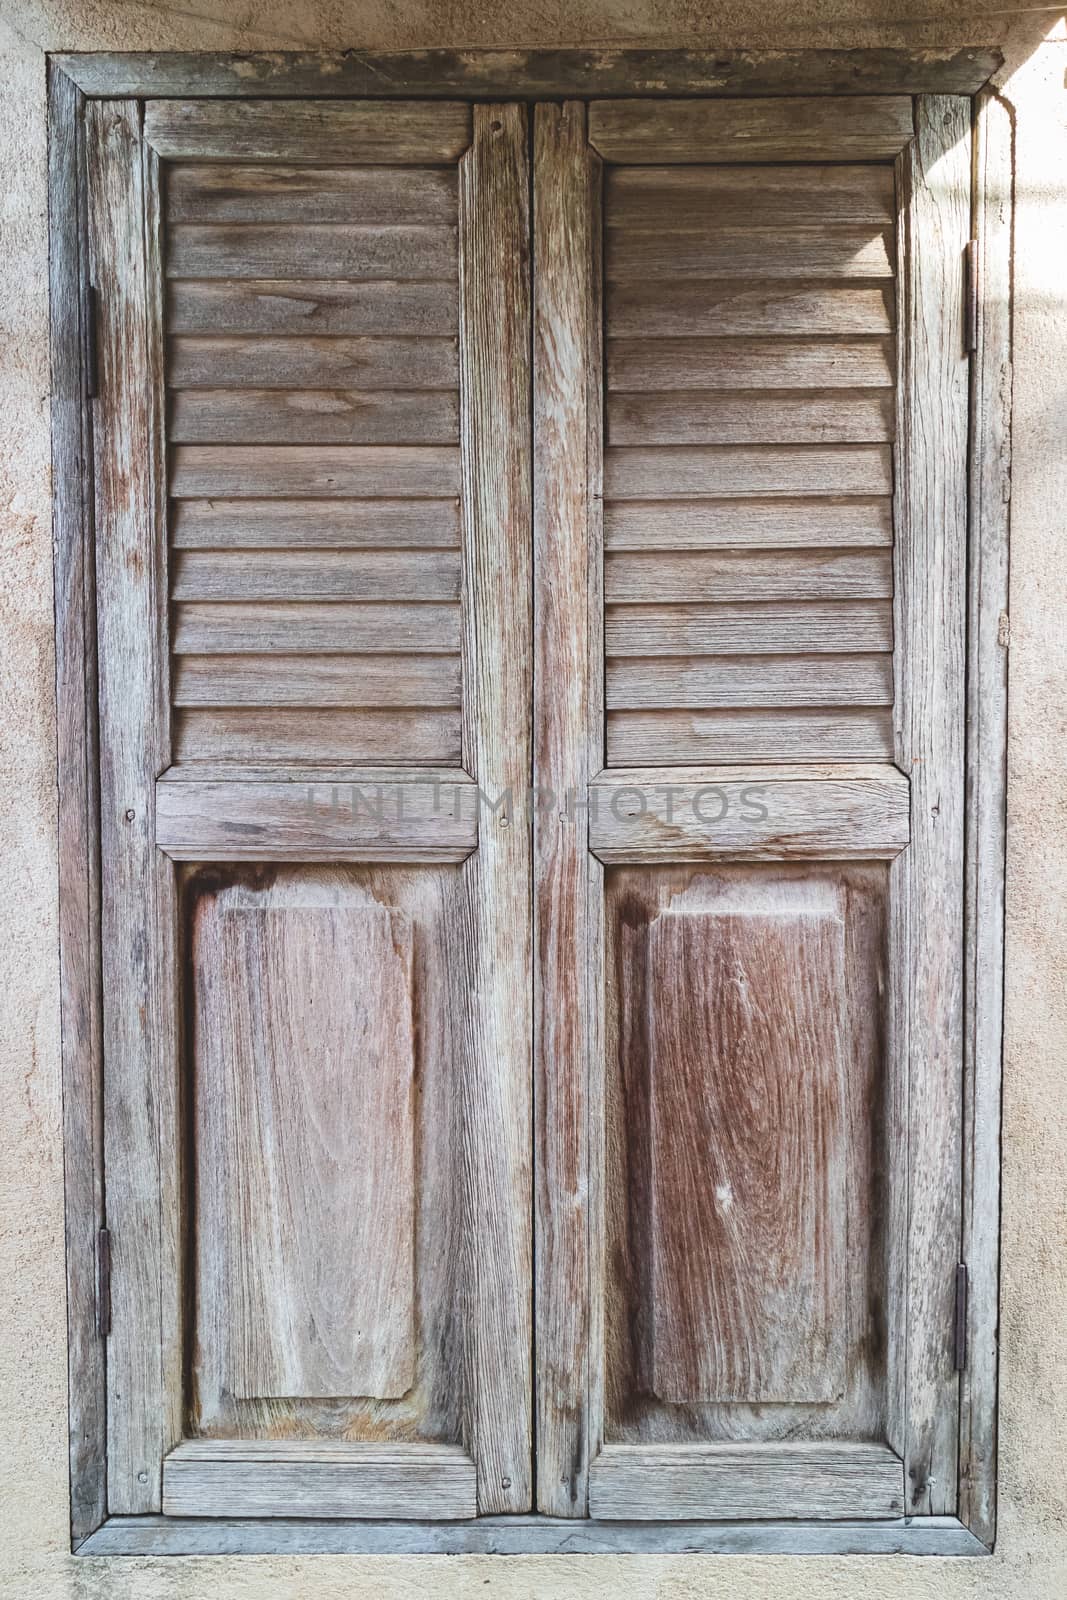 An old, shuttered wooden window with morning sunlight shining fr by panyajampatong